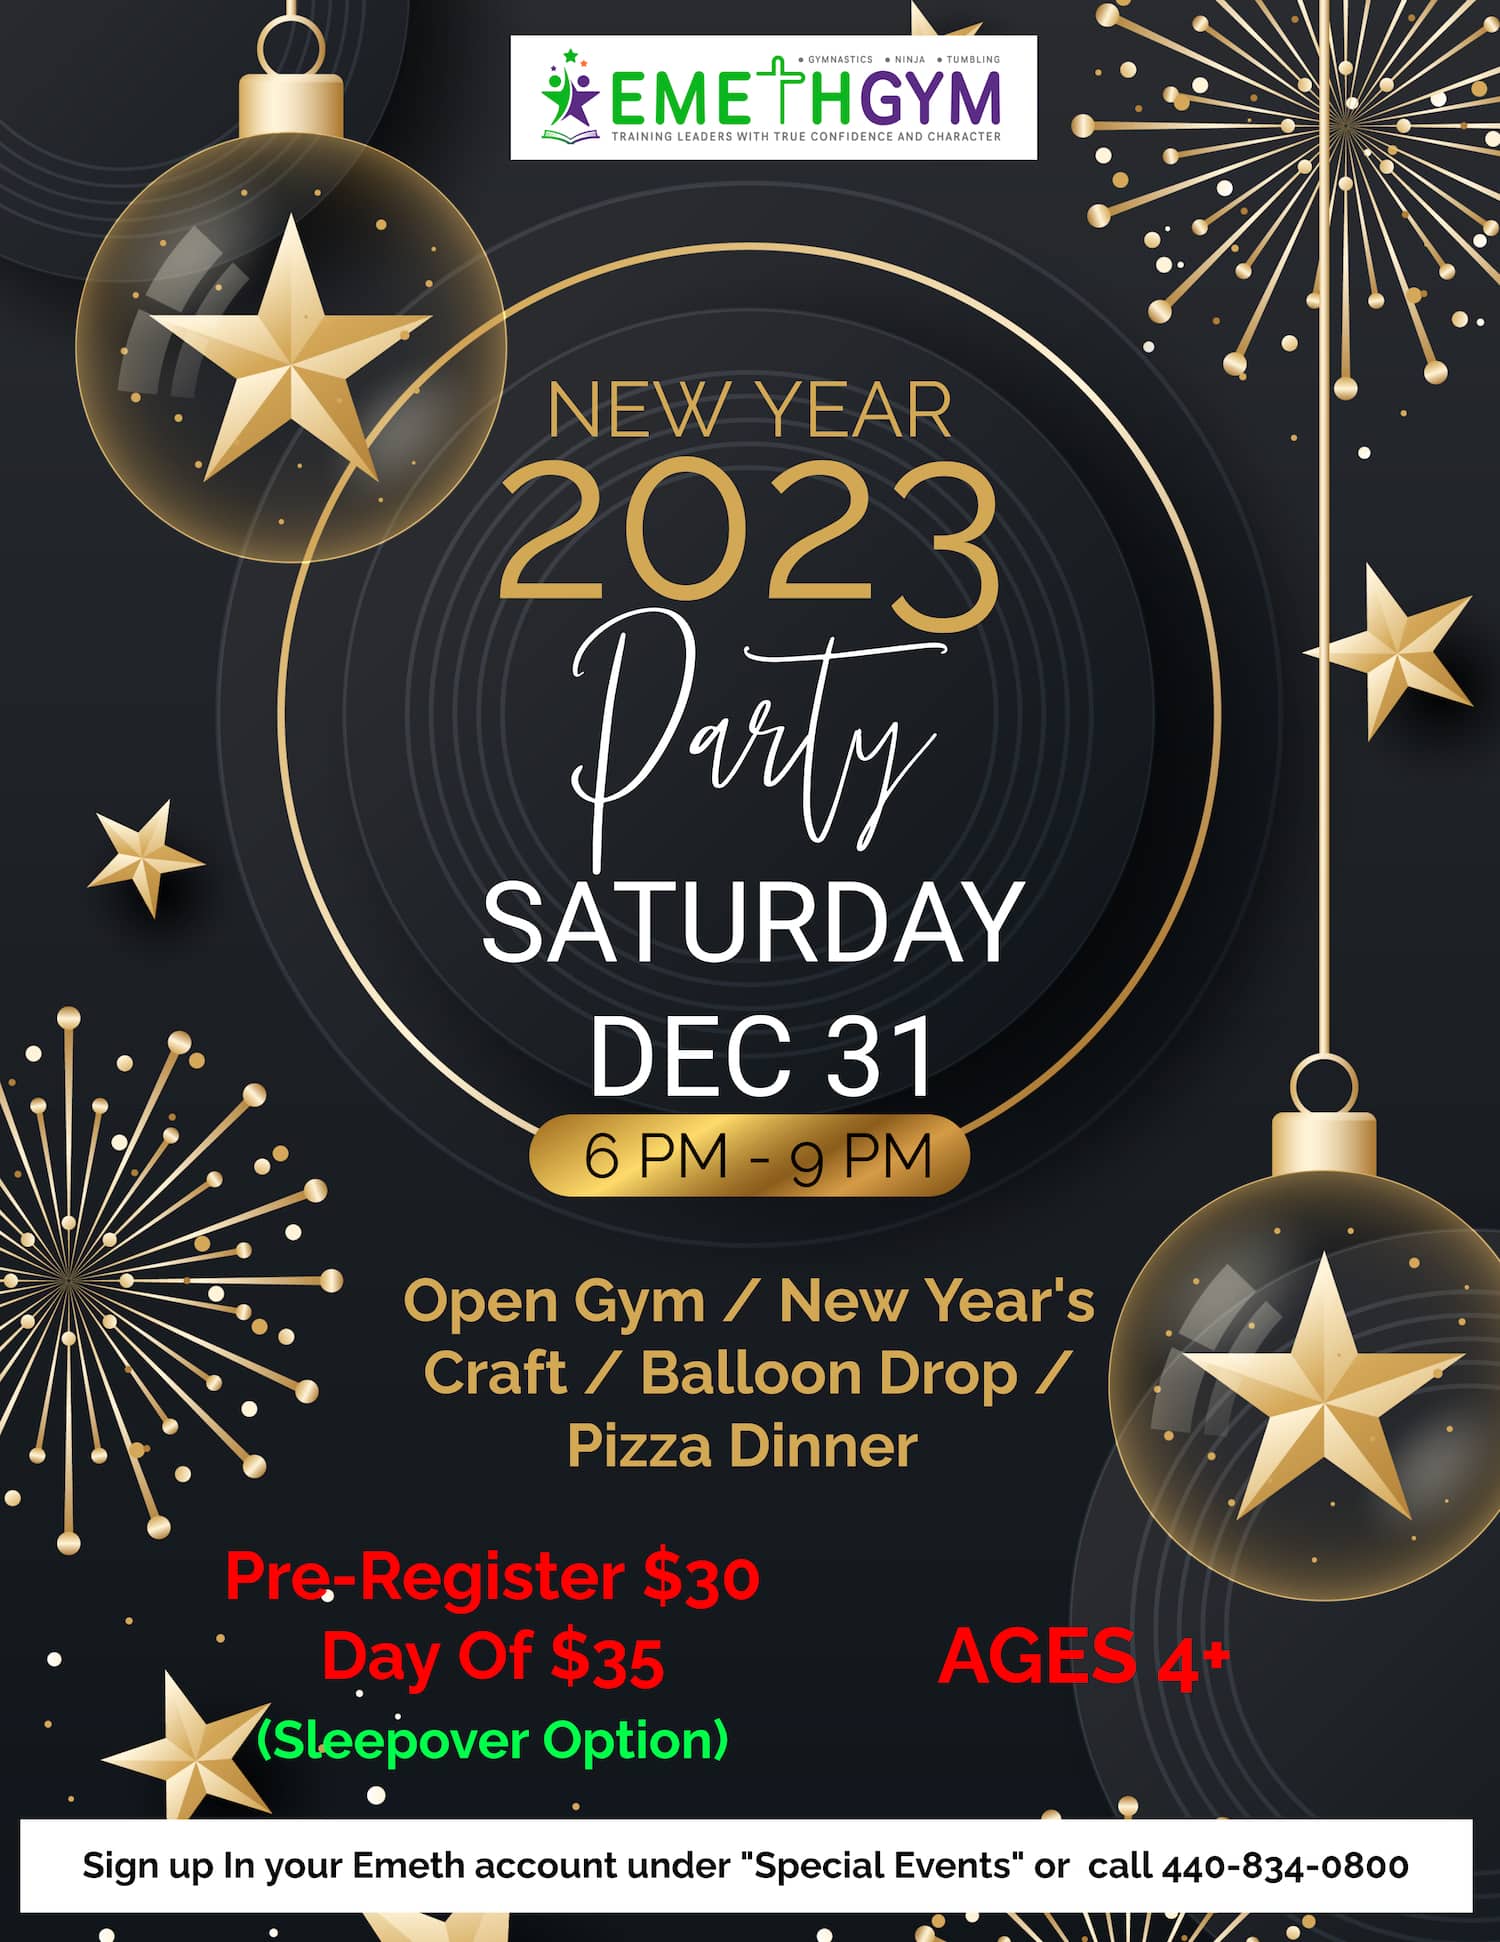 New Year 2023 Party